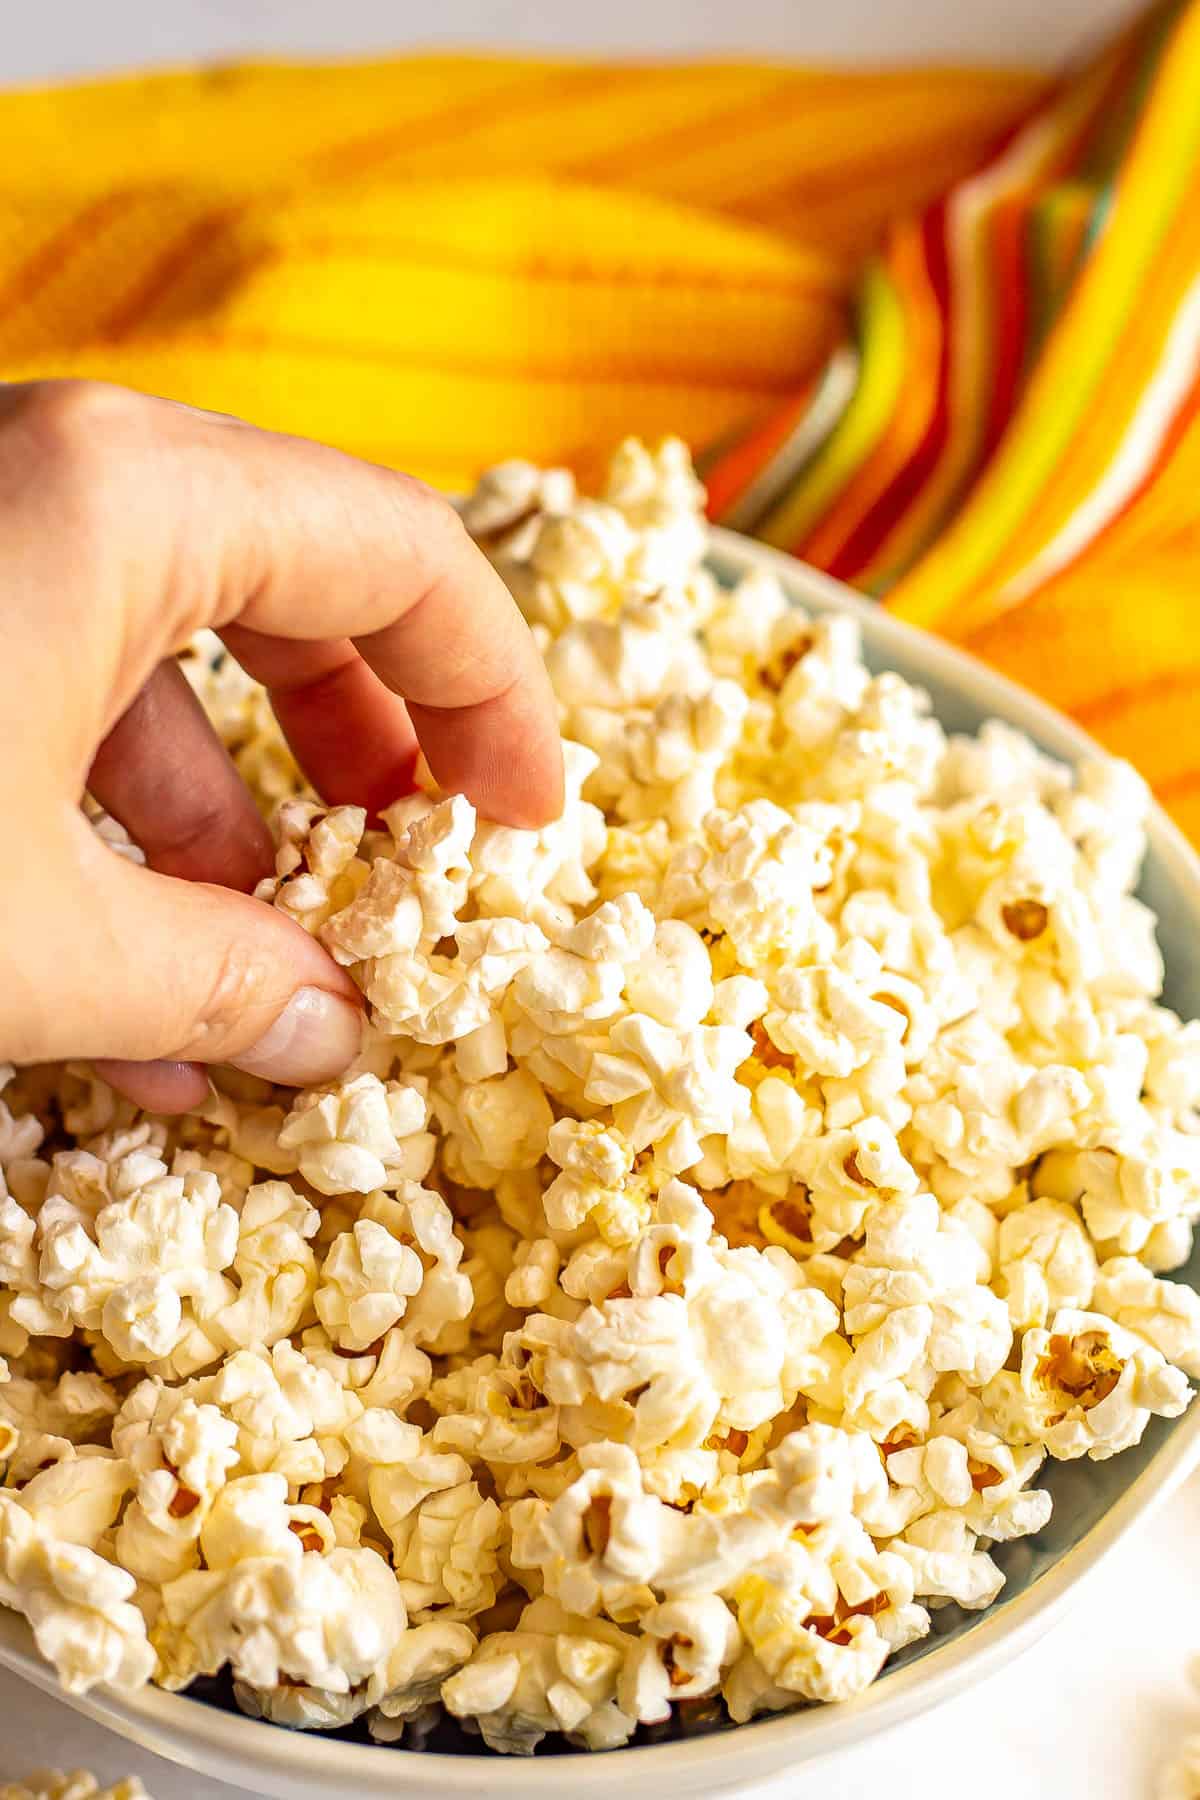 A hand picking up popcorn from a blue and white bowl.